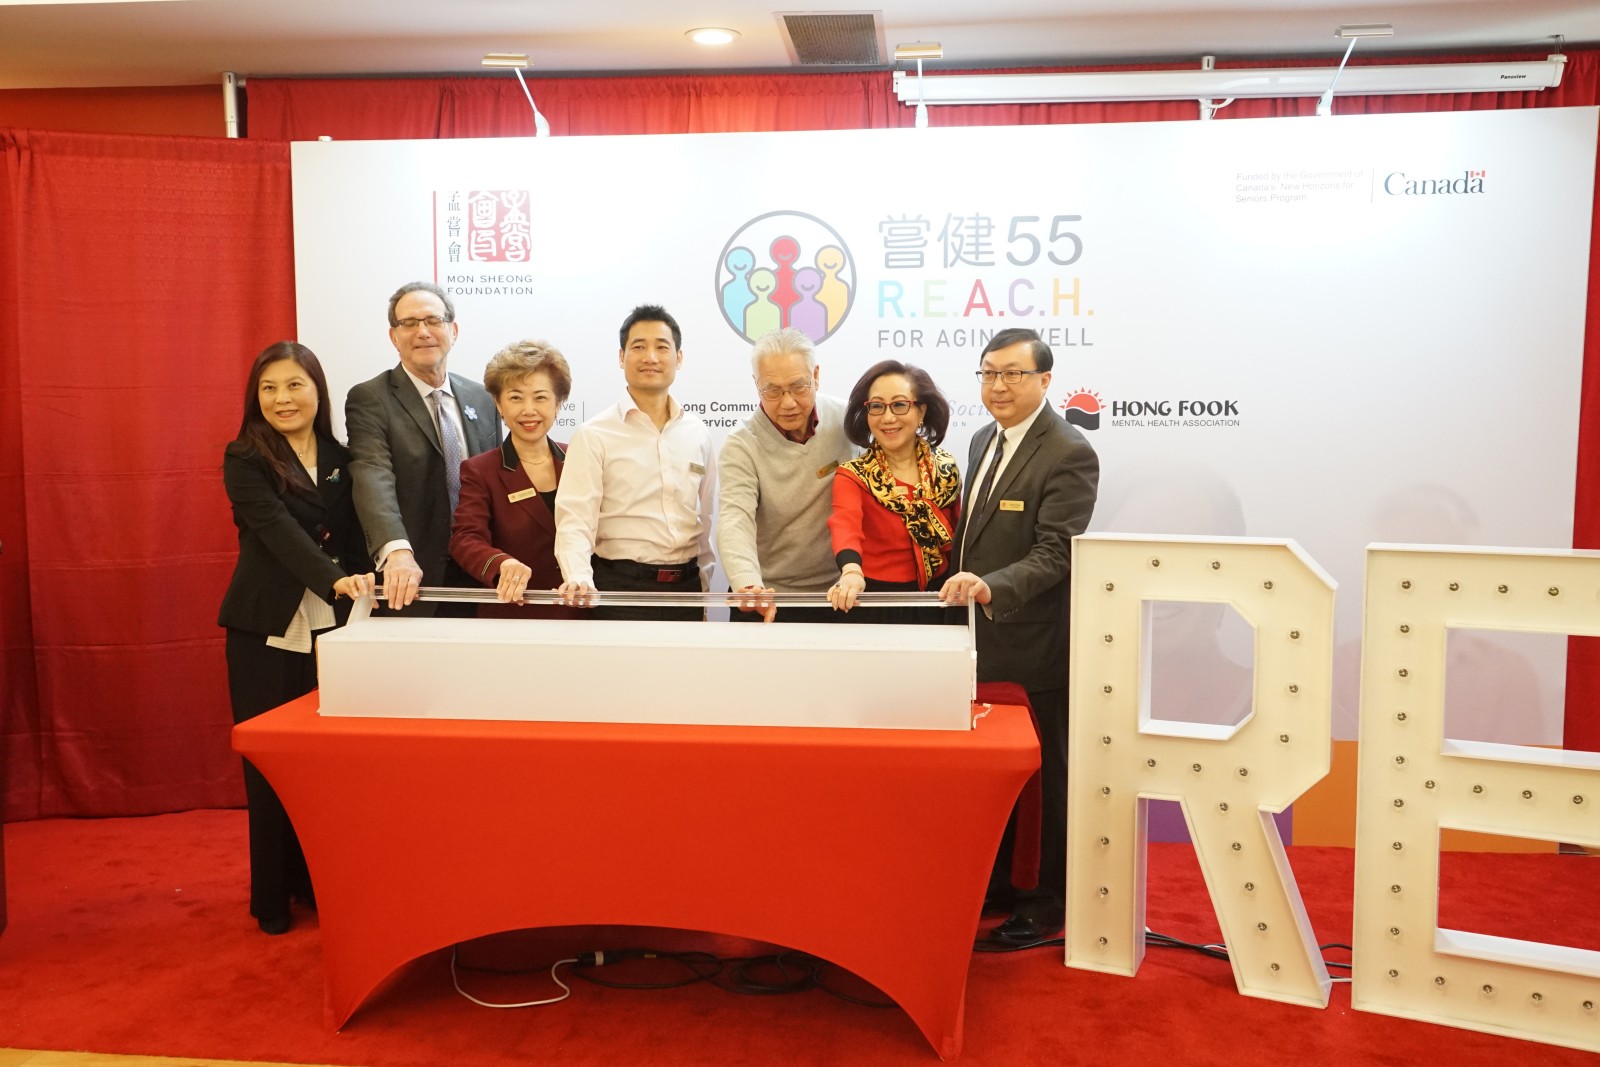 Mon Sheong Foundation was honoured to kick-off the R.E.A.C.H. for Aging Well project with collaborative partners